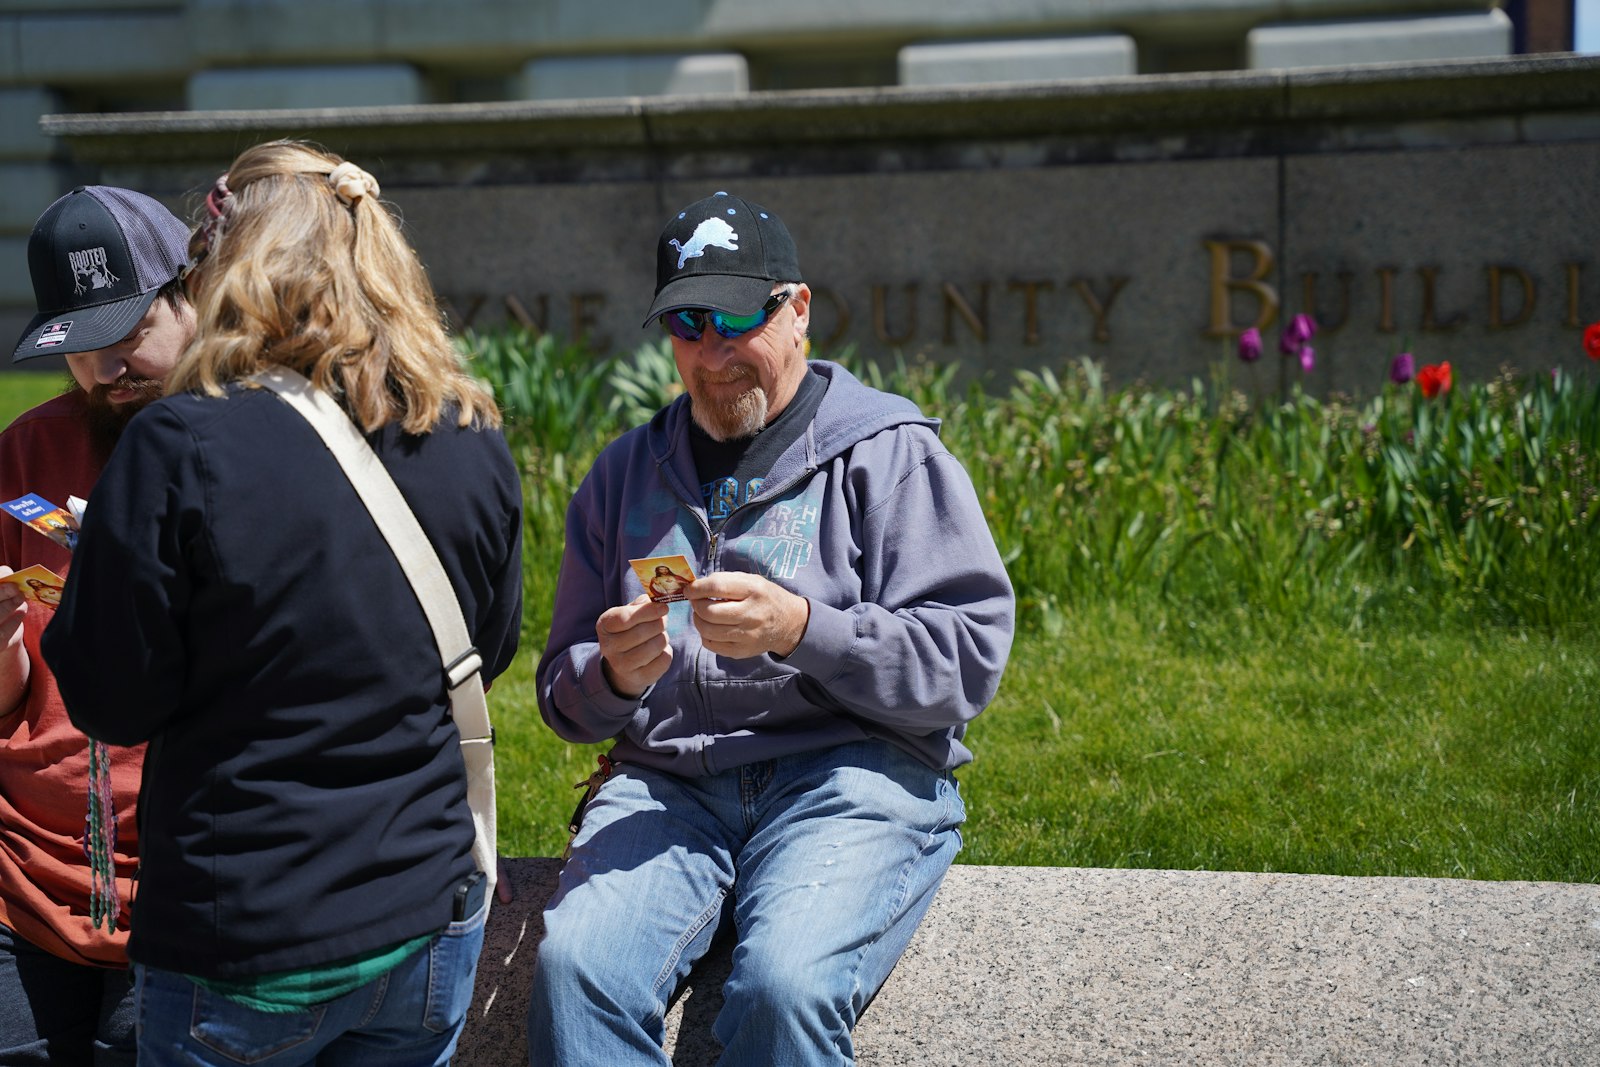 Beth Schuele of St. Paul Street Evangelization hands a prayer card to a Detroit Lions fan sitting in front of the old Wayne County Building on draft day.